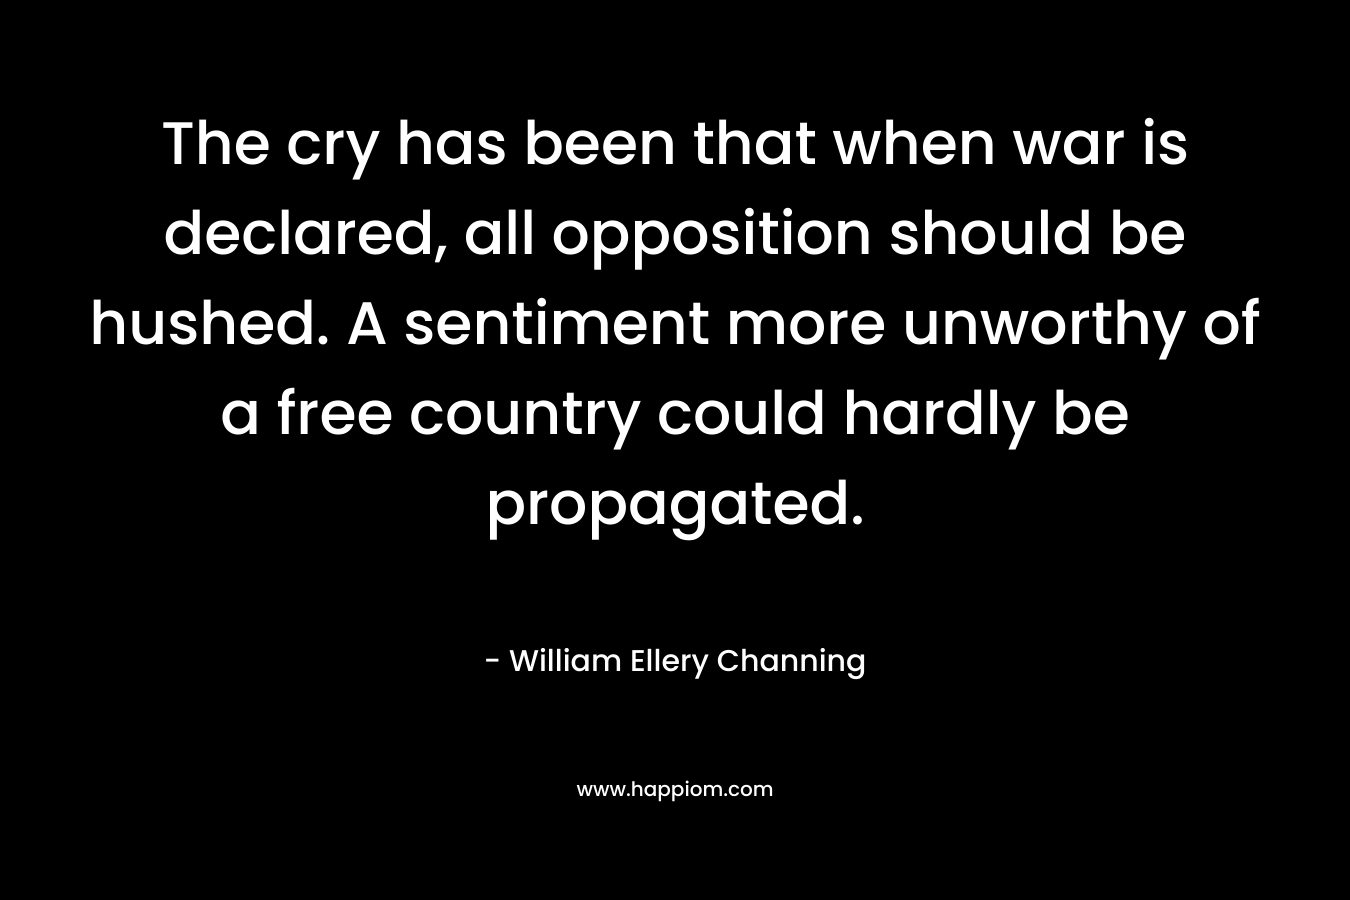 The cry has been that when war is declared, all opposition should be hushed. A sentiment more unworthy of a free country could hardly be propagated.